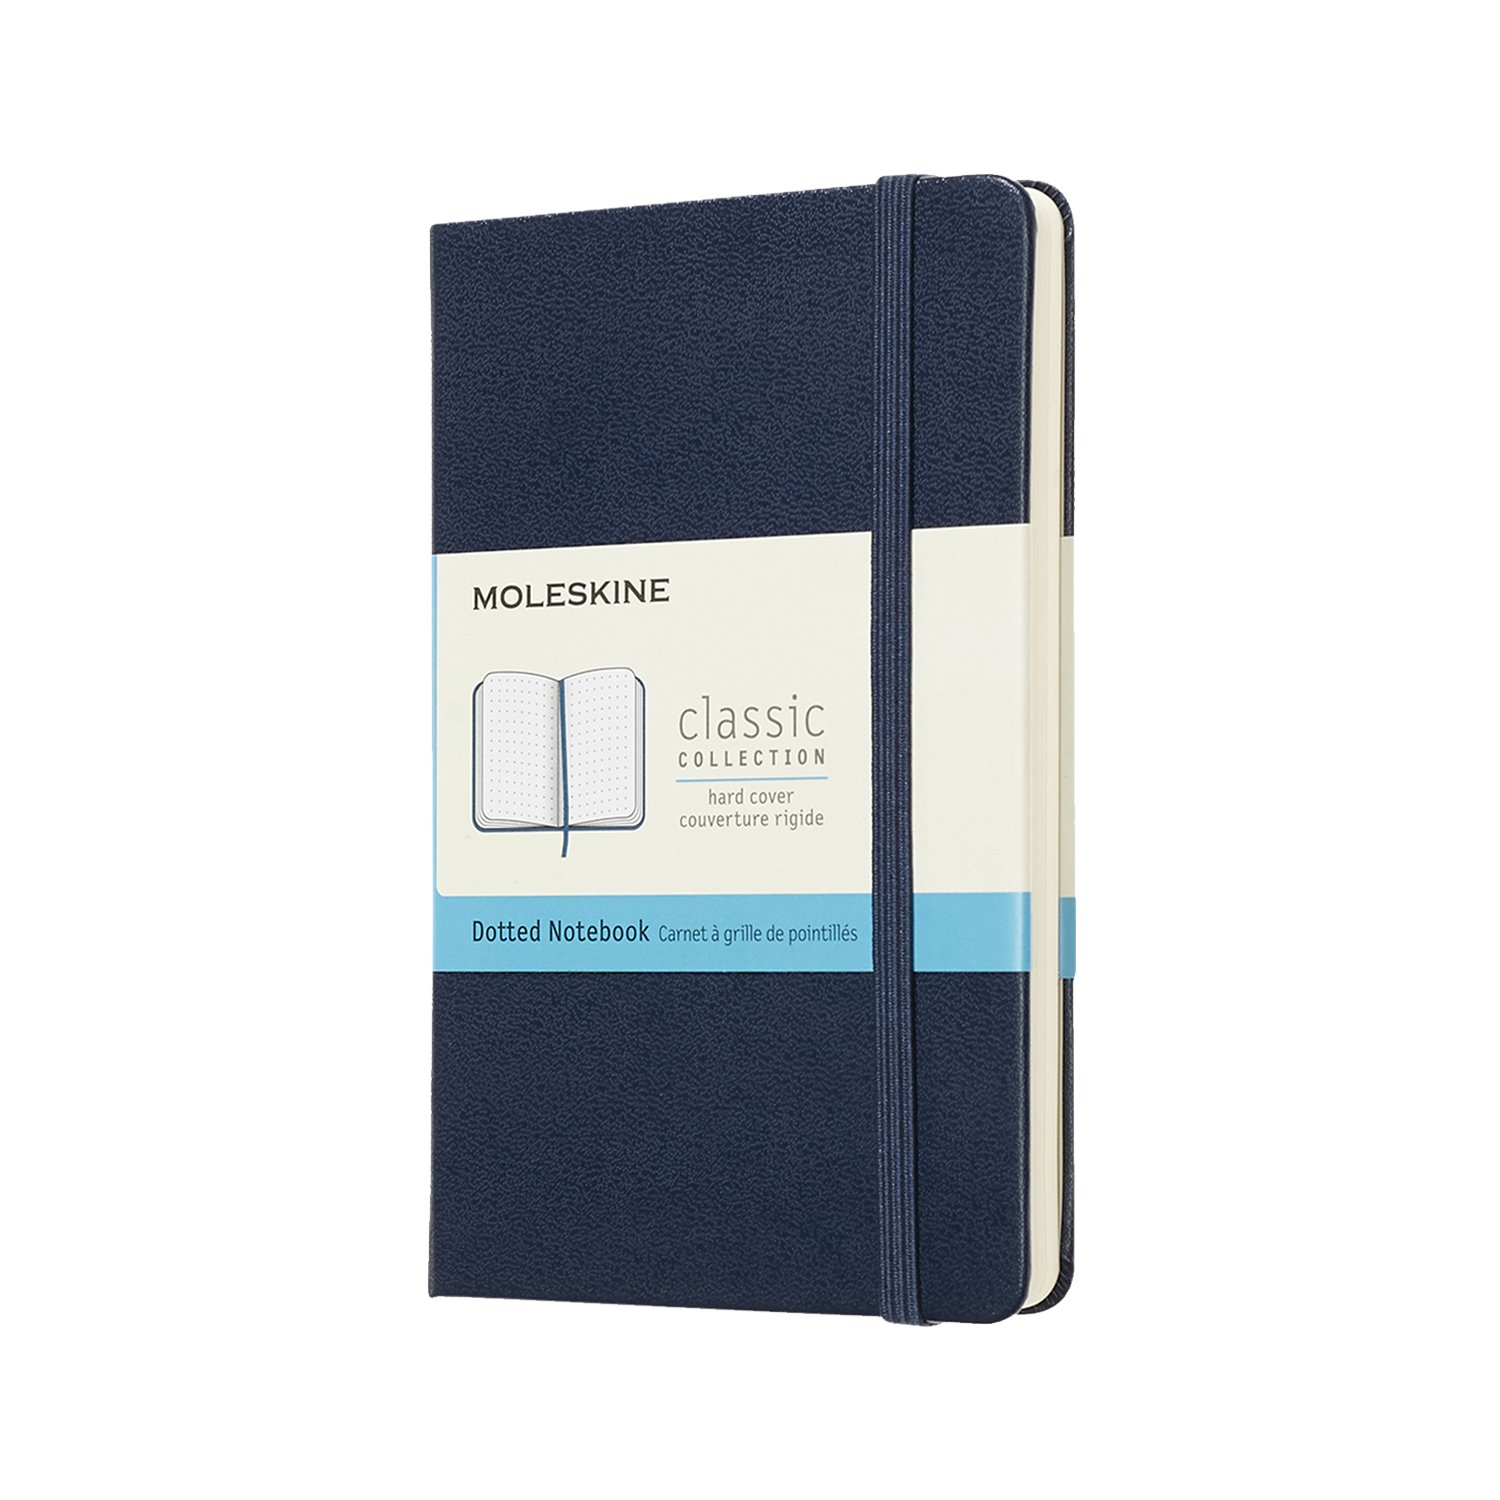 Moleskine A6 hard cover notebook, dotted | PrintSimple